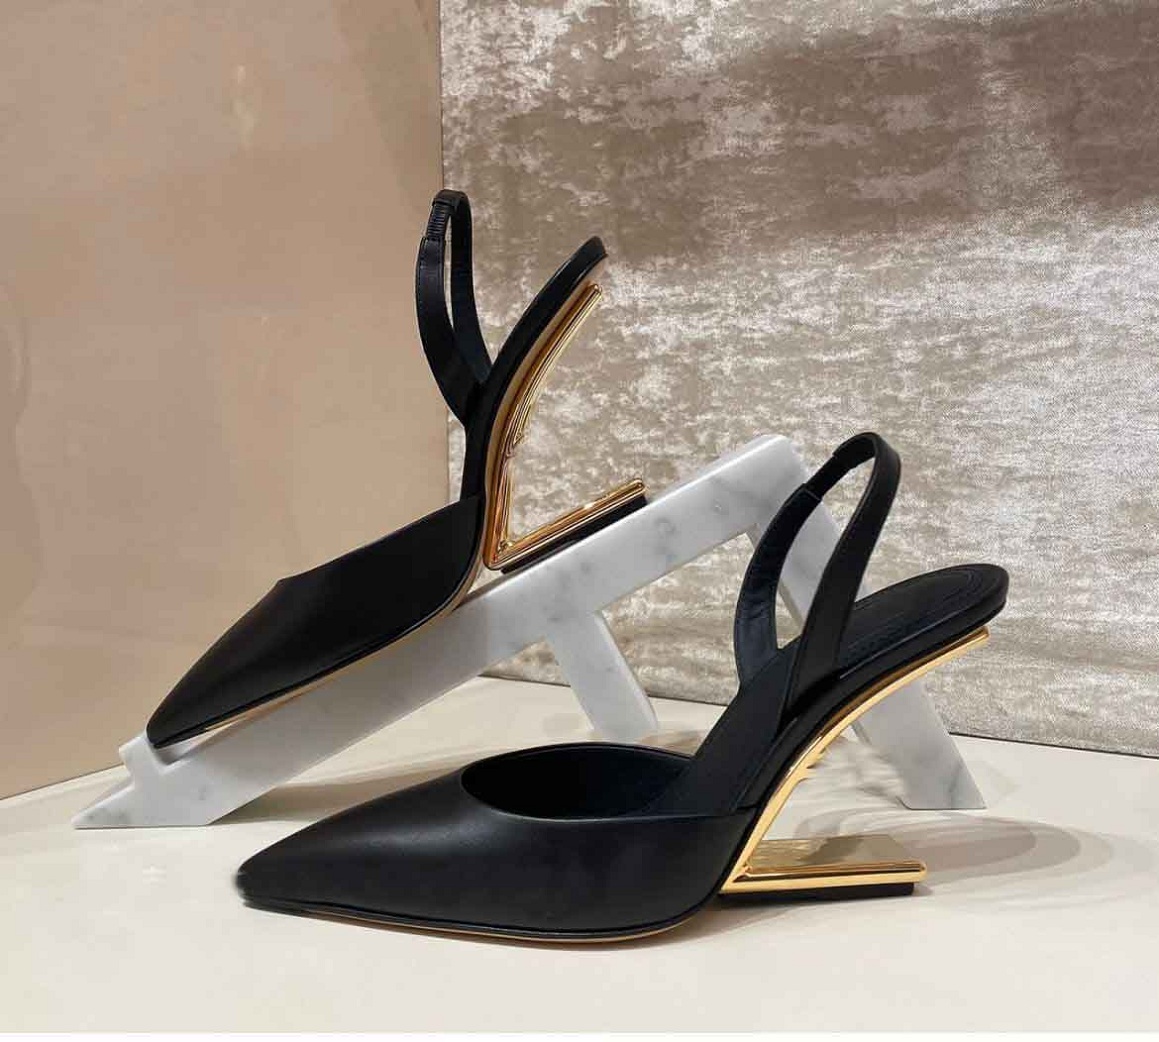 

Top Quality First Leather Sandals Shoes Women Diagonal F-shaped Slingback High-heeled Lady Pointed Toe Pumps Party Wedding Gladiator Sandalias EU35-42